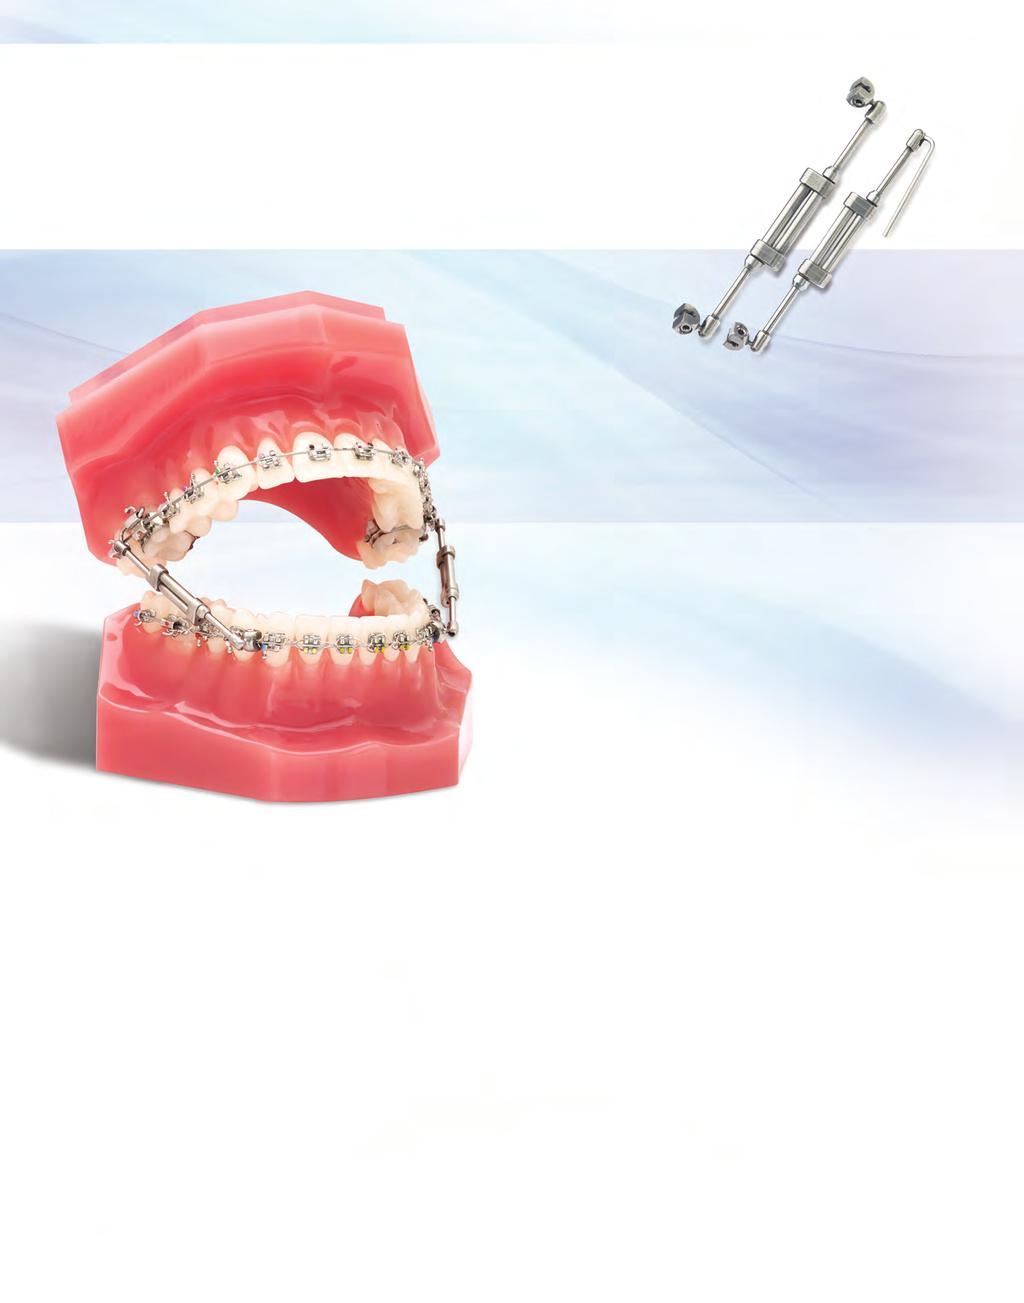 ATTACHMENTS TruEase Bite Corrector Devices Innovative Orthodontic Intraoral Devices for the Correction of Class II and Class III